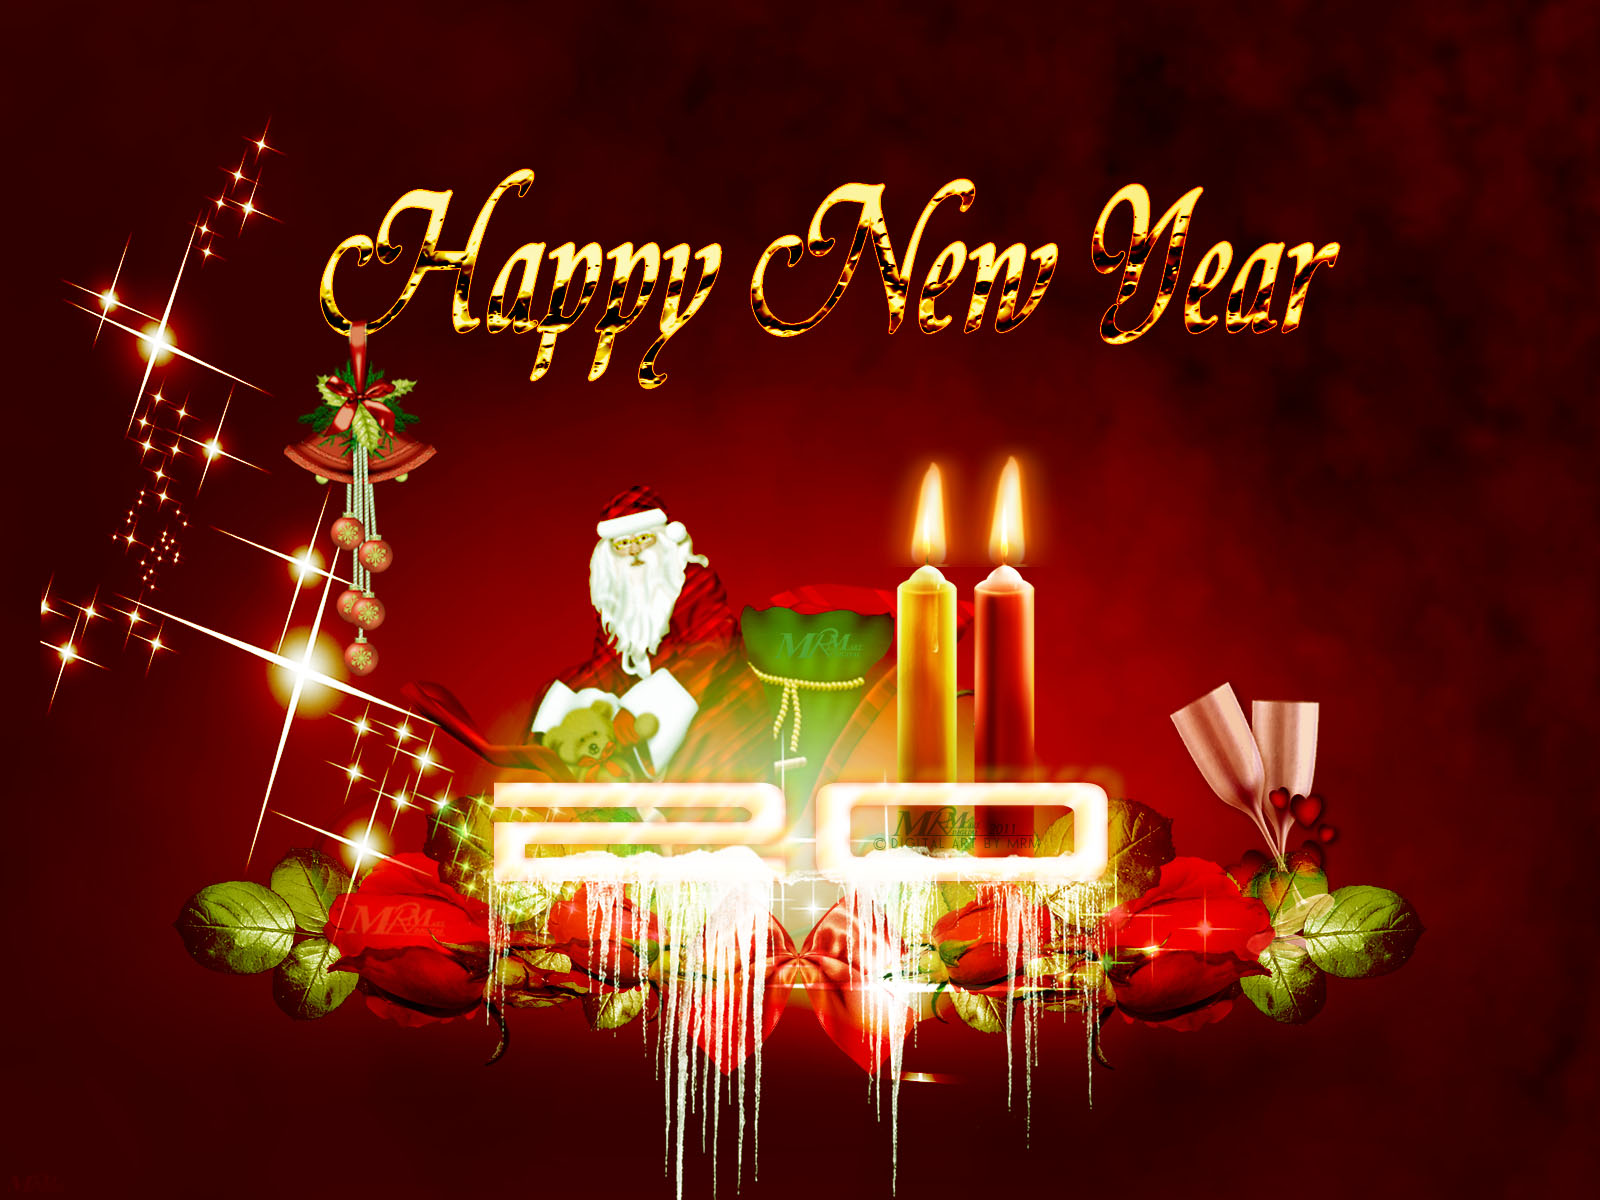 Happy New Year 2022 Images For Facebook